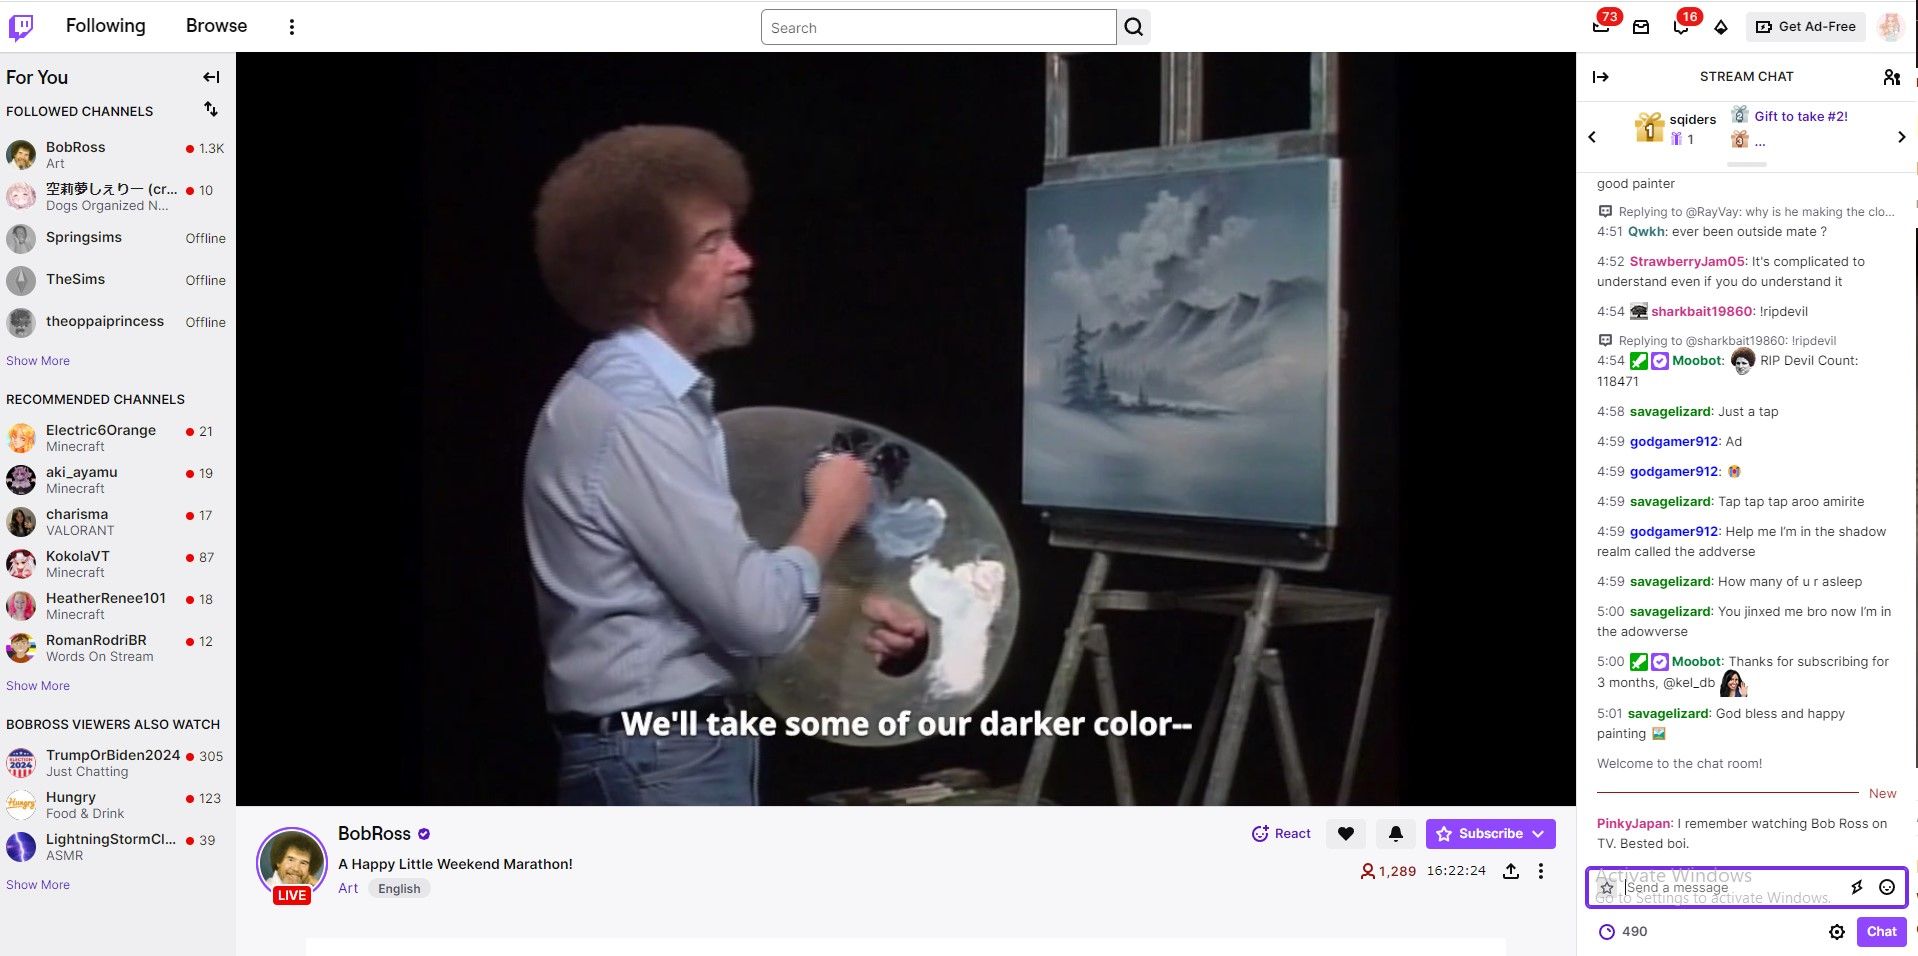 Legendary painter Bob Ross painting on Twitch via the official Bob Ross channel